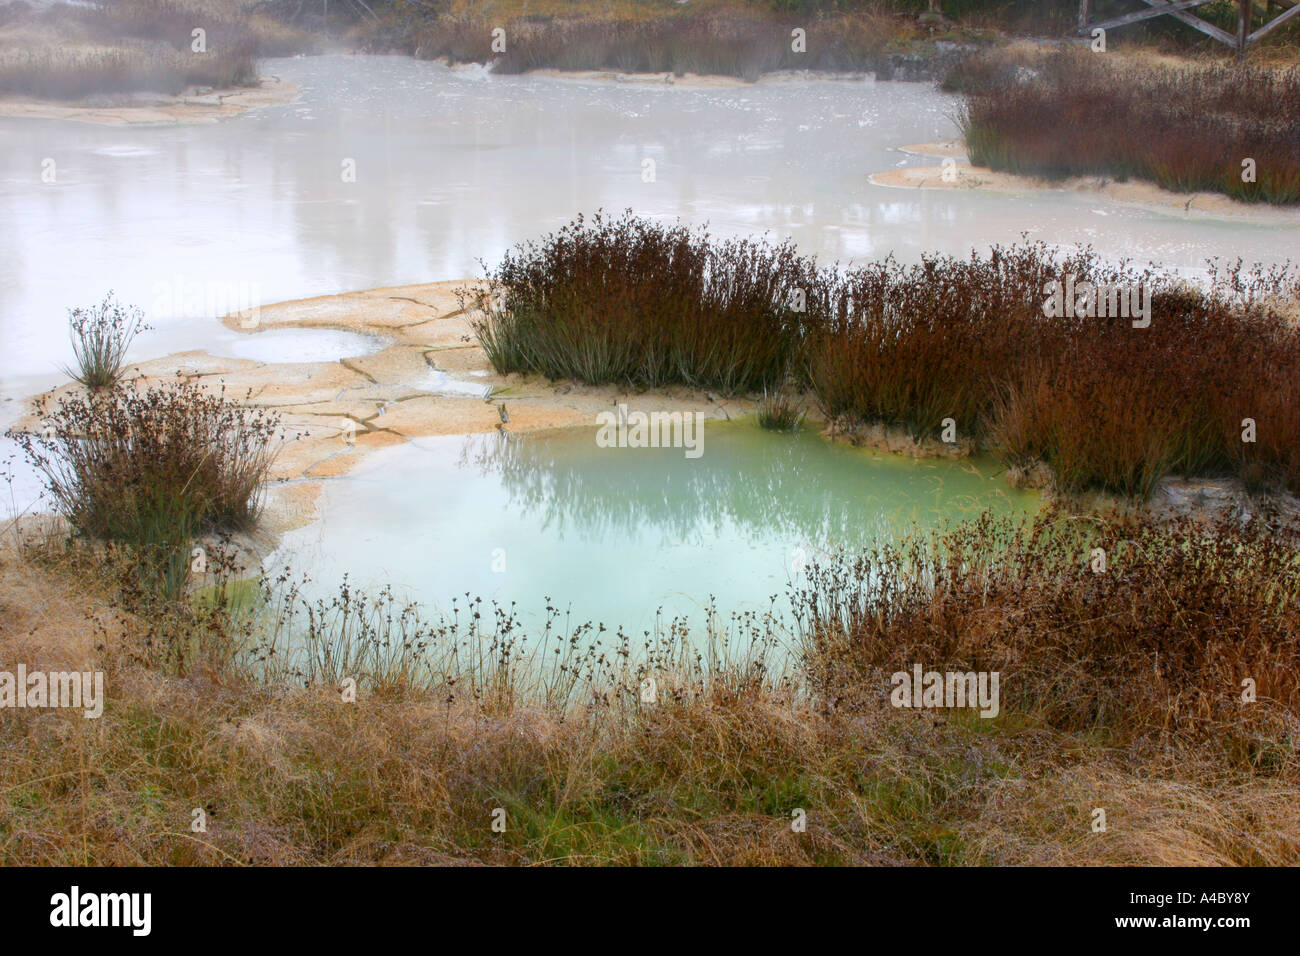 West Thumb Geyser Basin, il parco nazionale di Yellowstone, wyoming Foto Stock